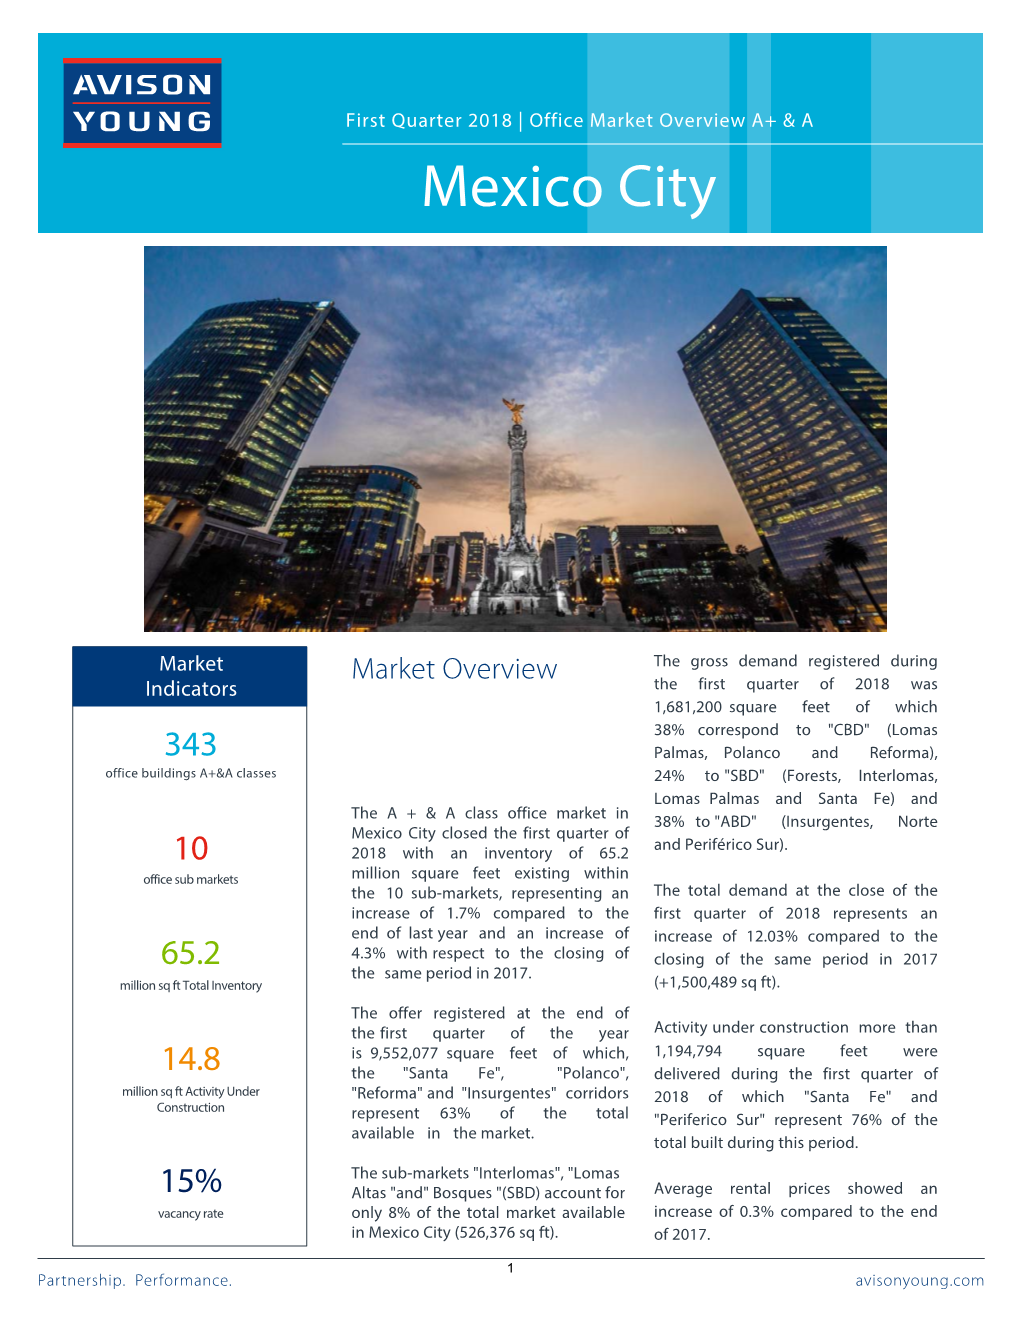 Mexico City Office Market Overview 1Q 2018